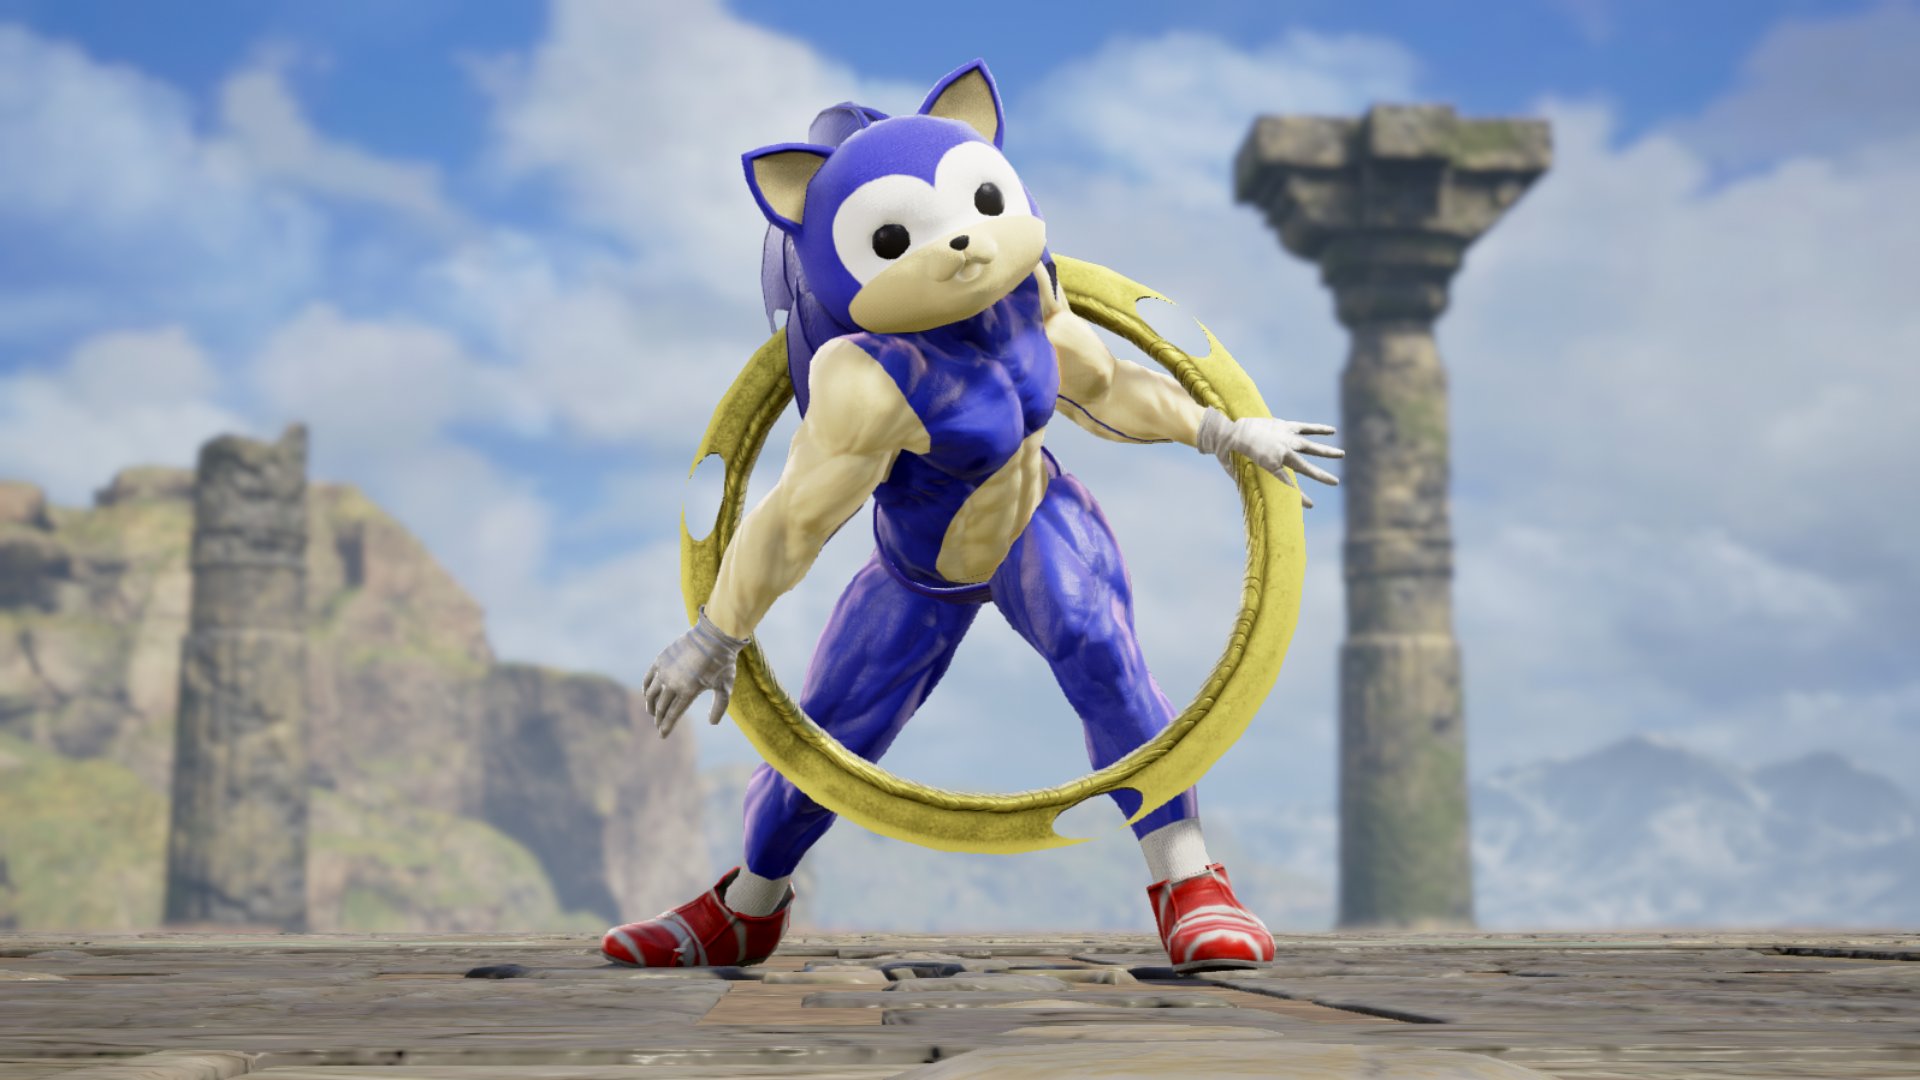 Sonic dick compilation